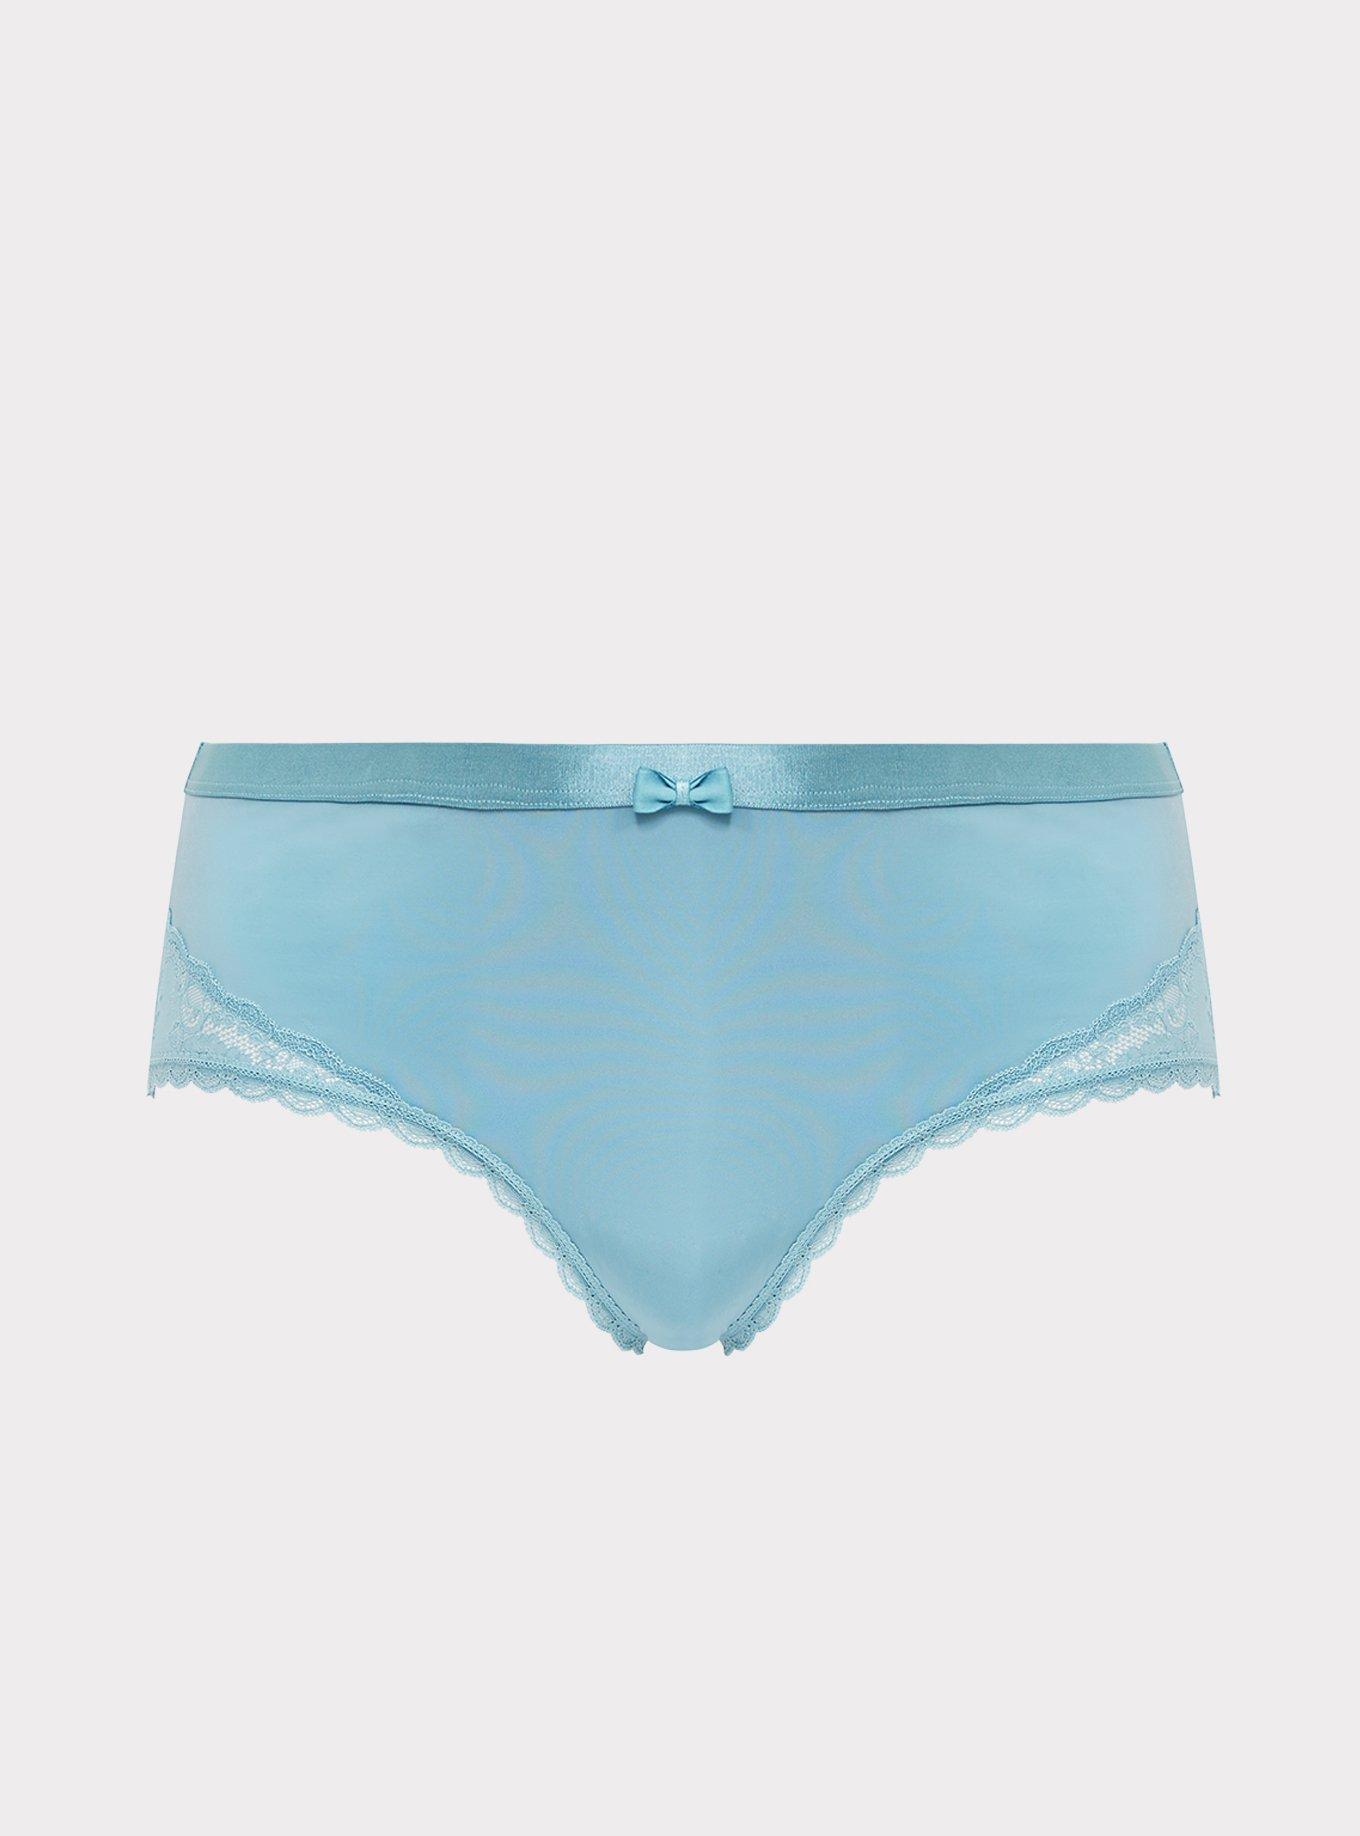 Women's lace and microfiber briefs in Bluish Green Daily Glam Trendy Sexy